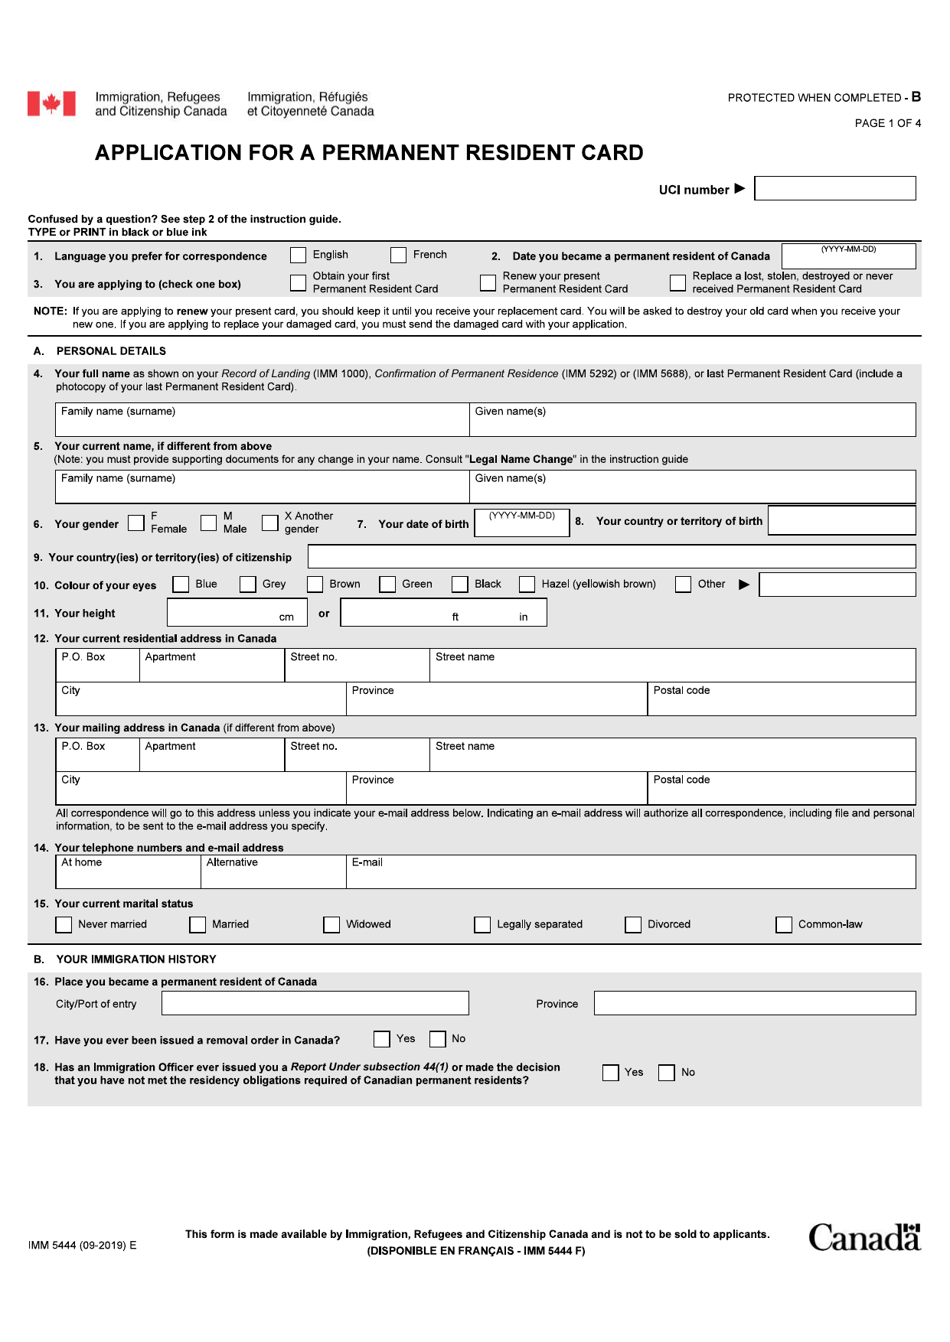 Form IMM5444 Application for a Permanent Resident Card - Canada, Page 1